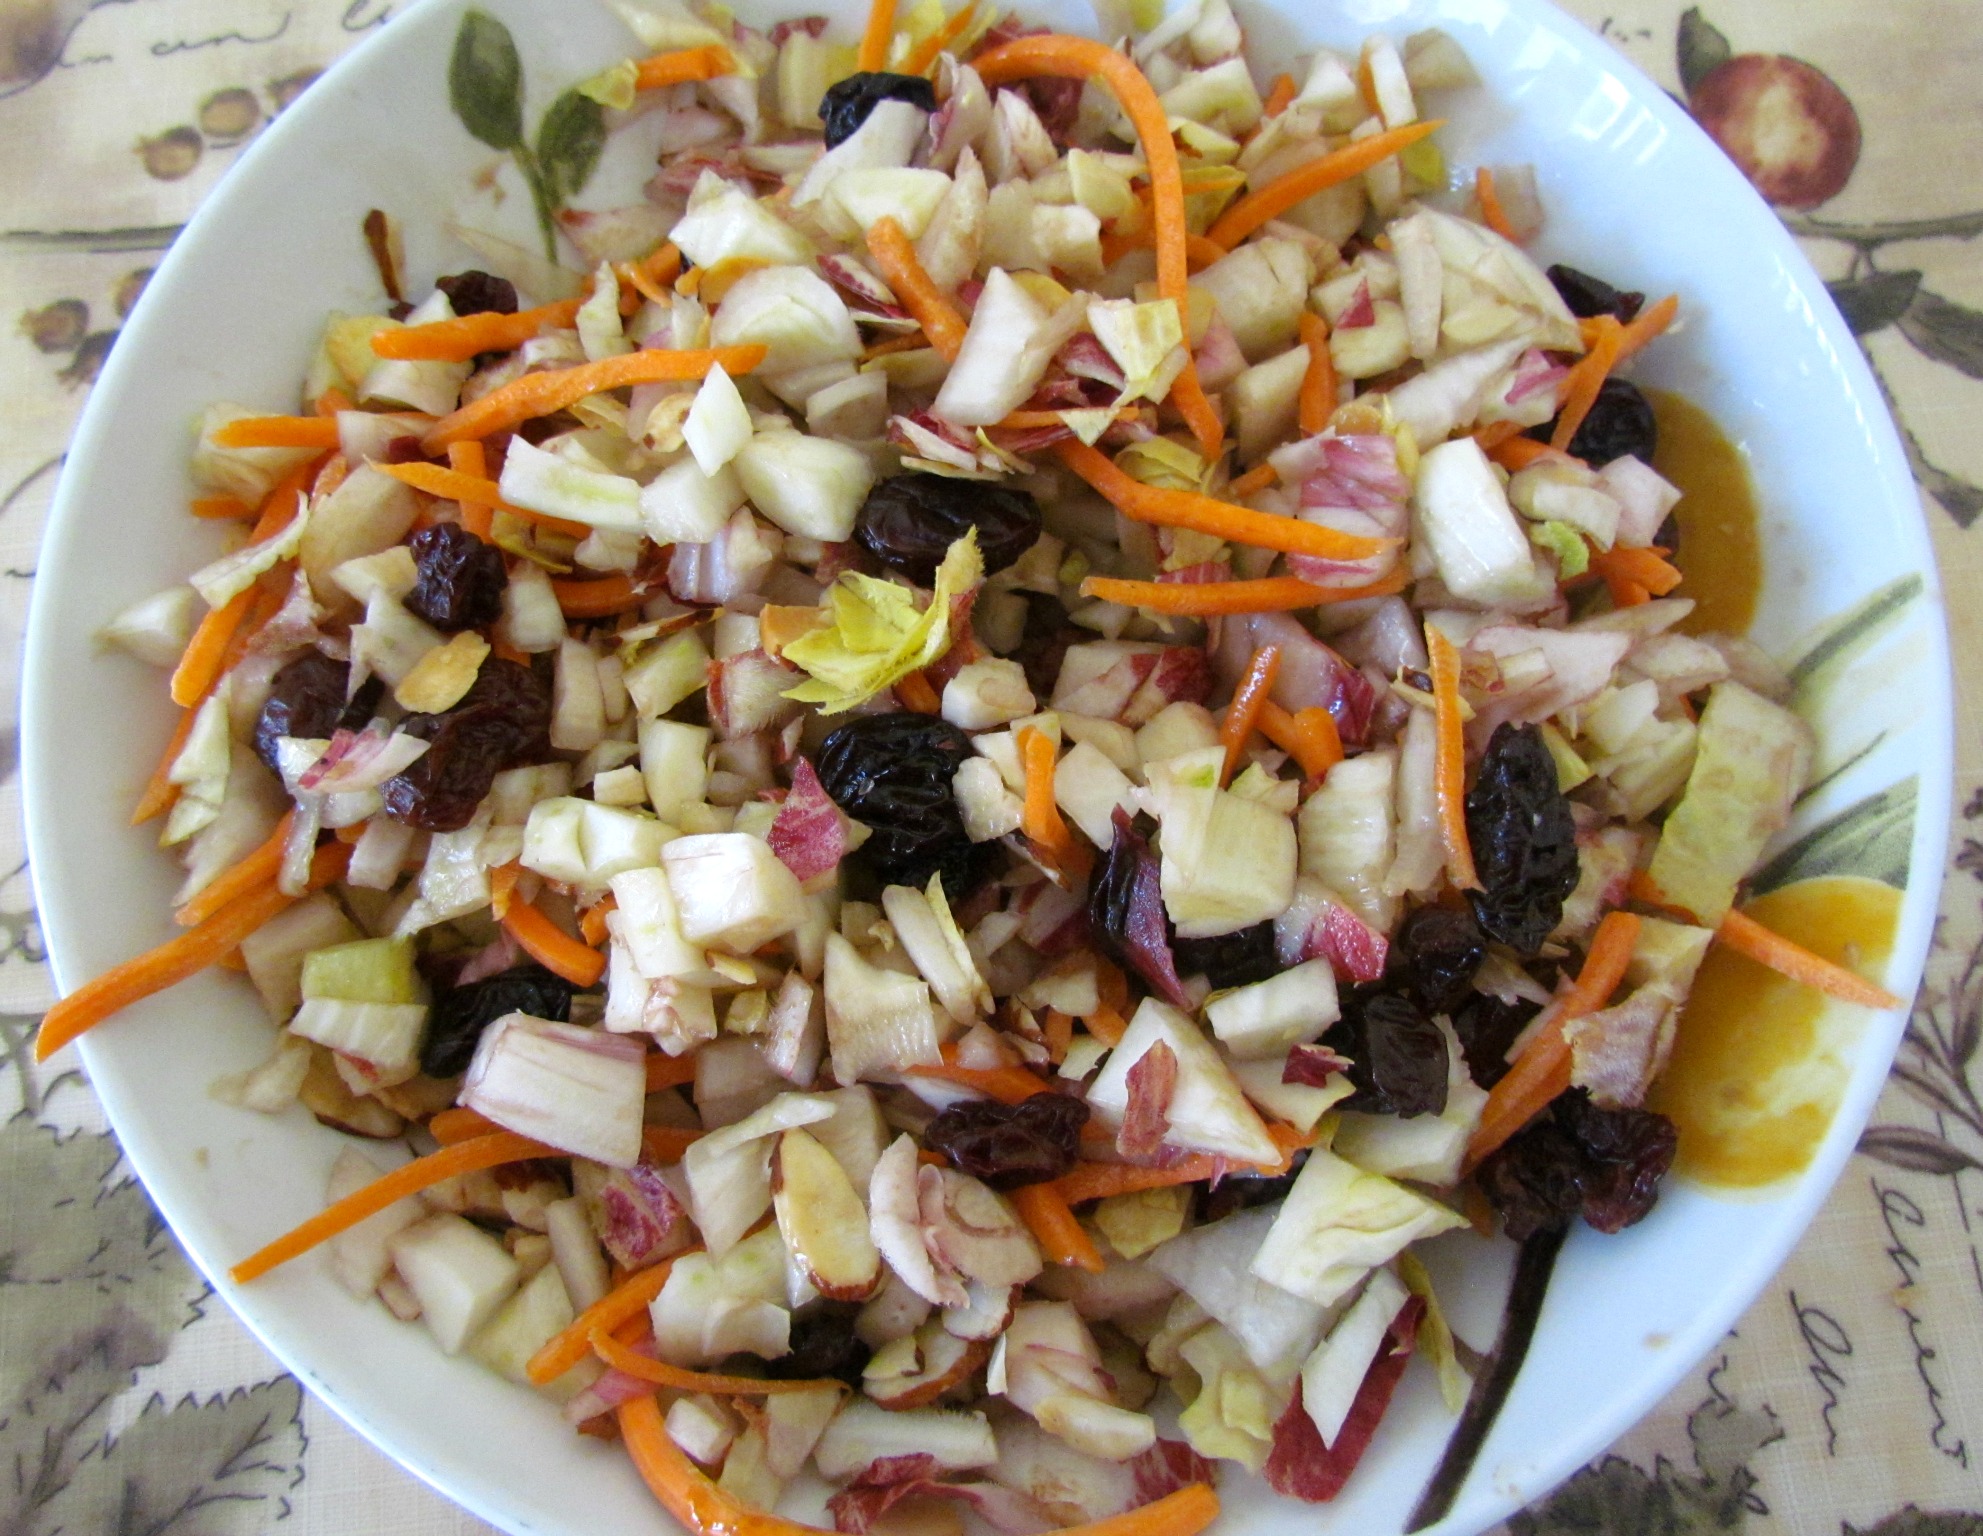 Fennel & Endive Salad with Almonds -n- Cherries